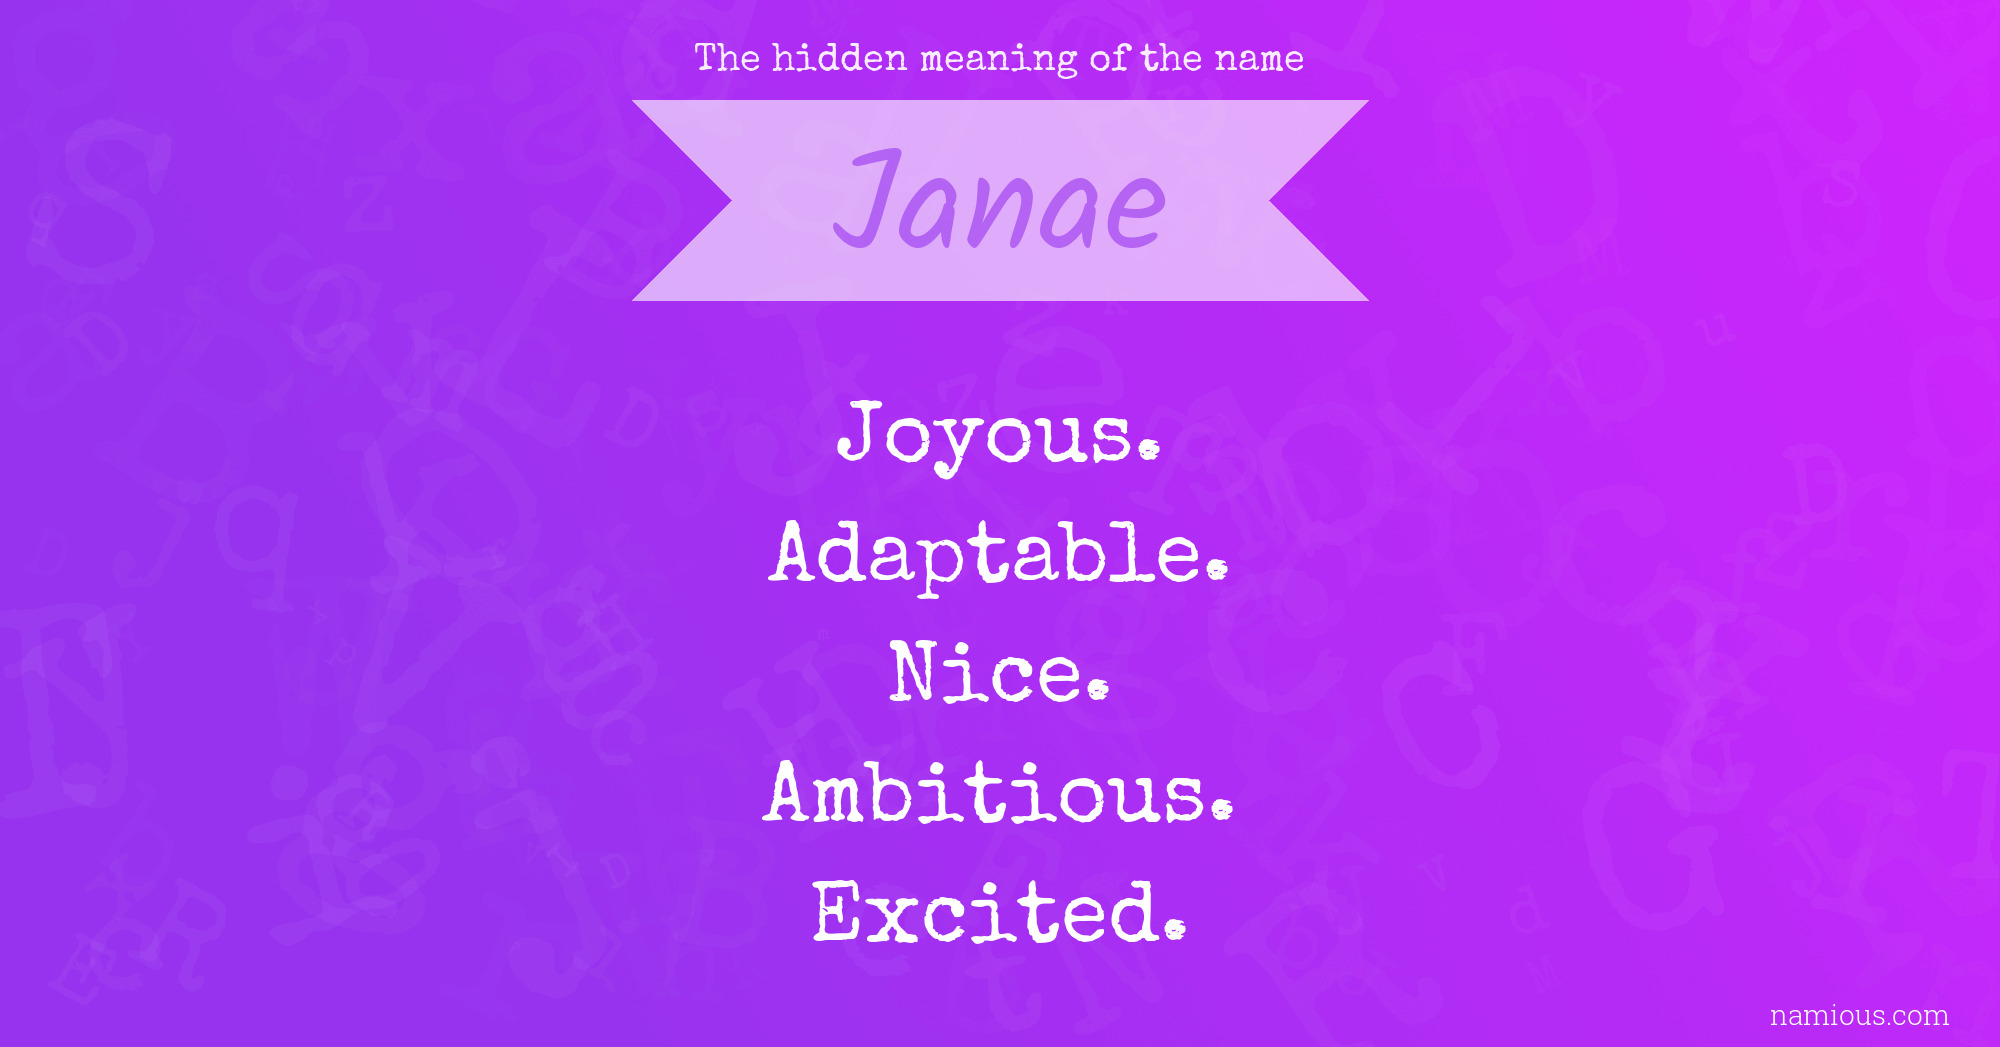 The hidden meaning of the name Janae